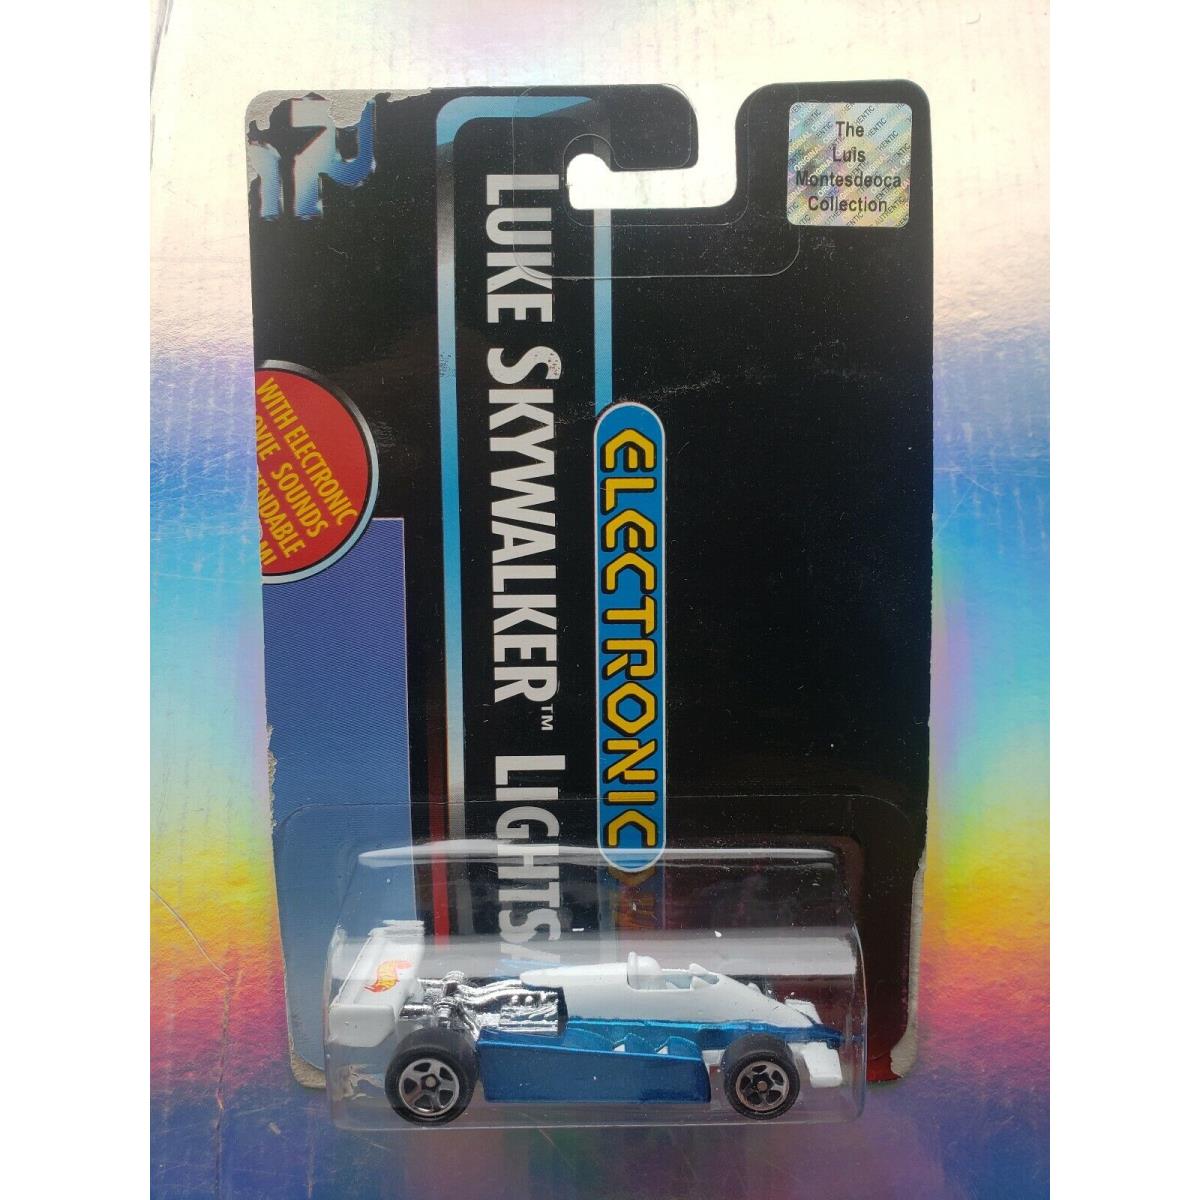 Prototype Card Indy Car From Luis Montesdeoca Employee Collection Hot Wheels